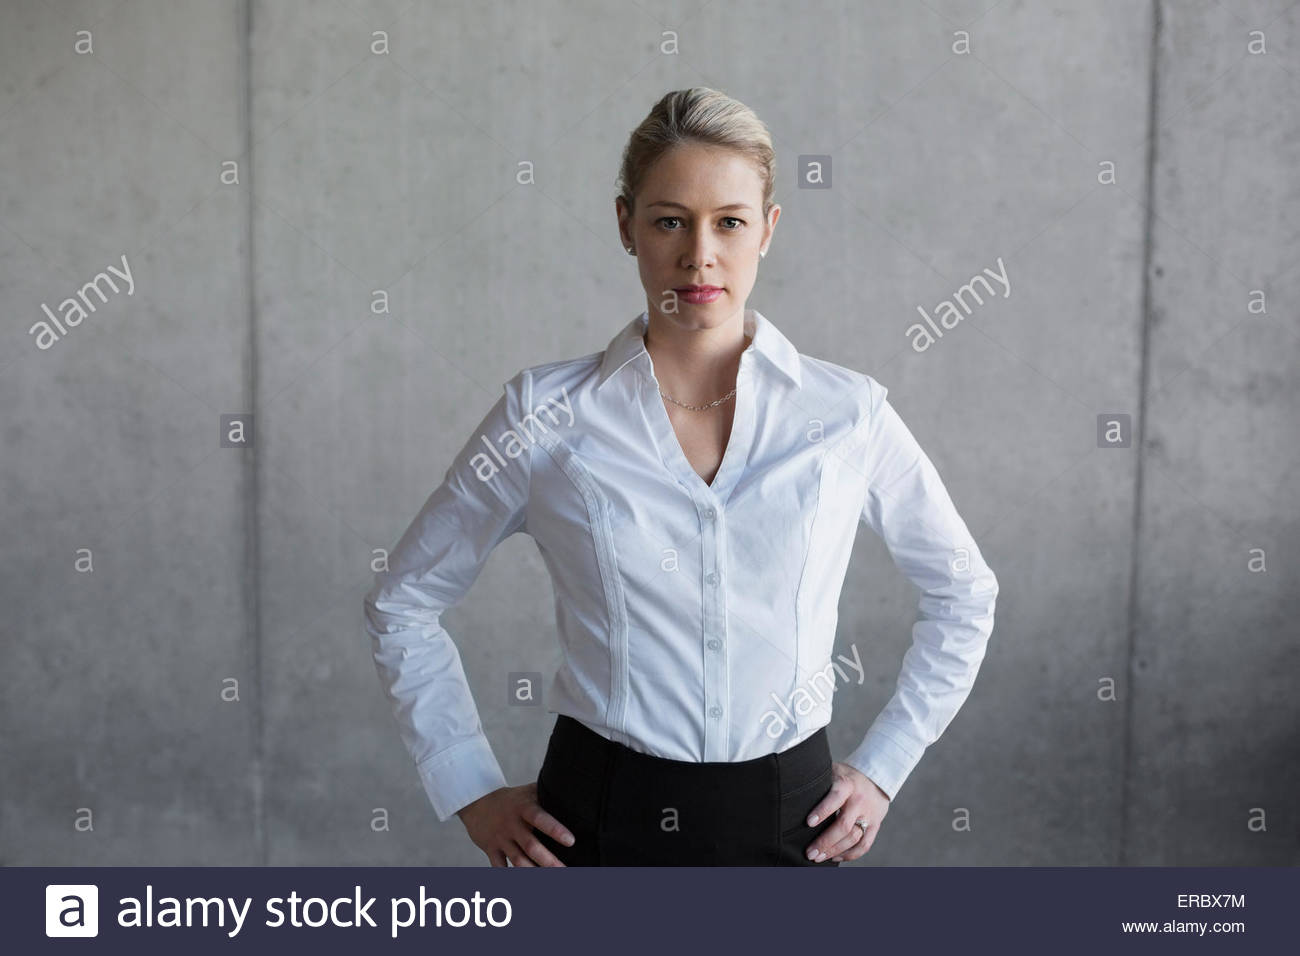 Portrait of confident businesswoman with hands on hips Stock Photo